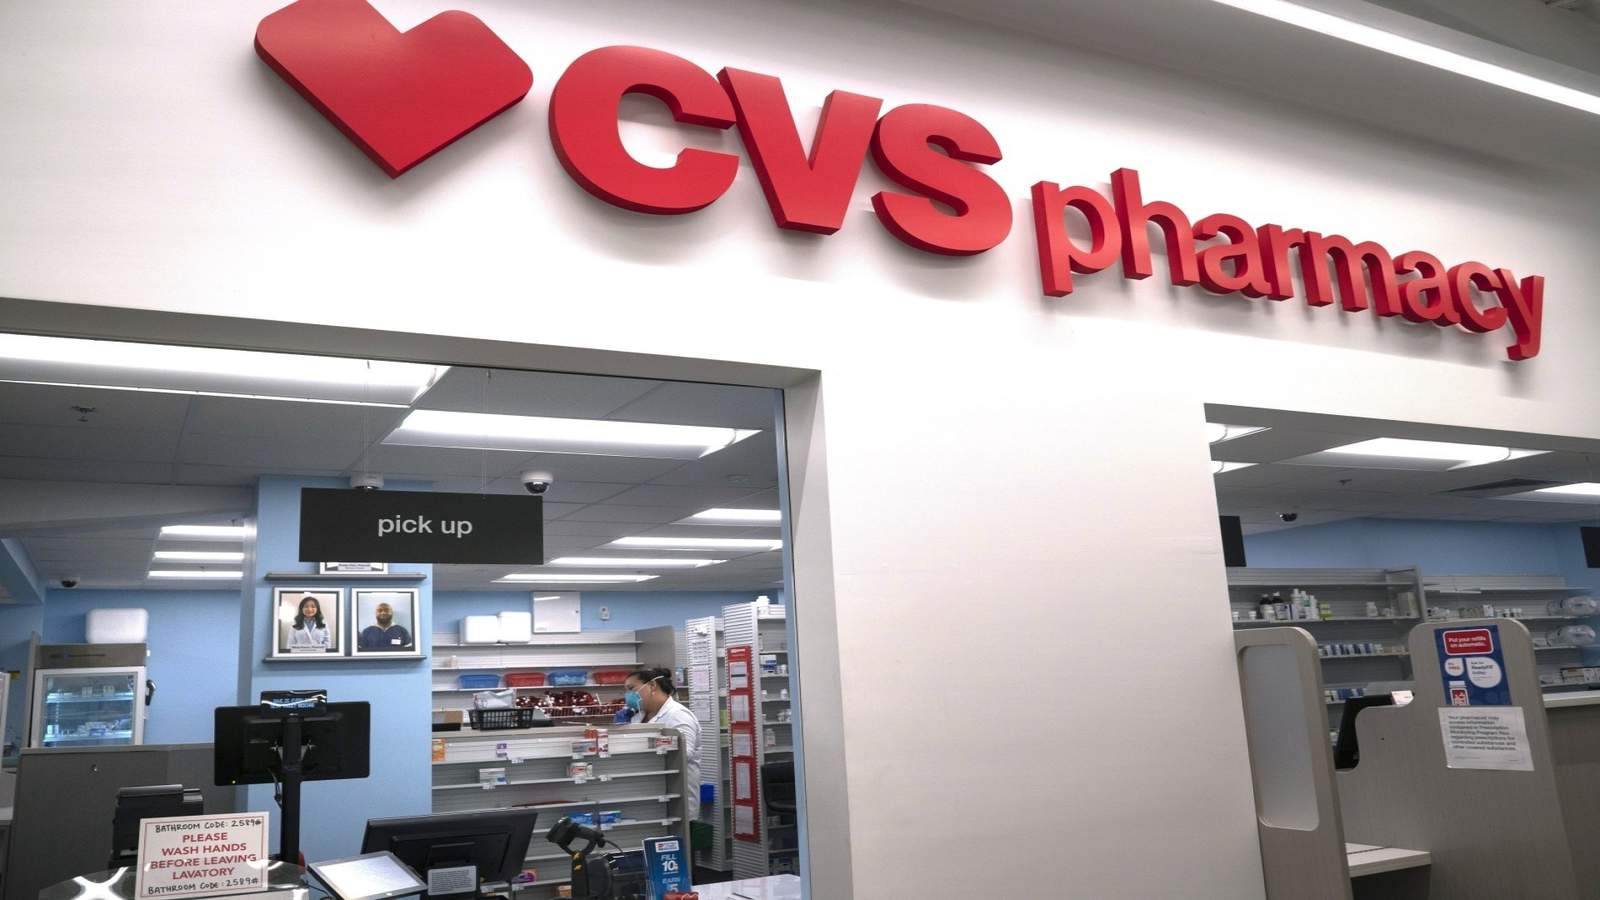 36 CVS stores will be administering coronavirus vaccines to eligible Virginians